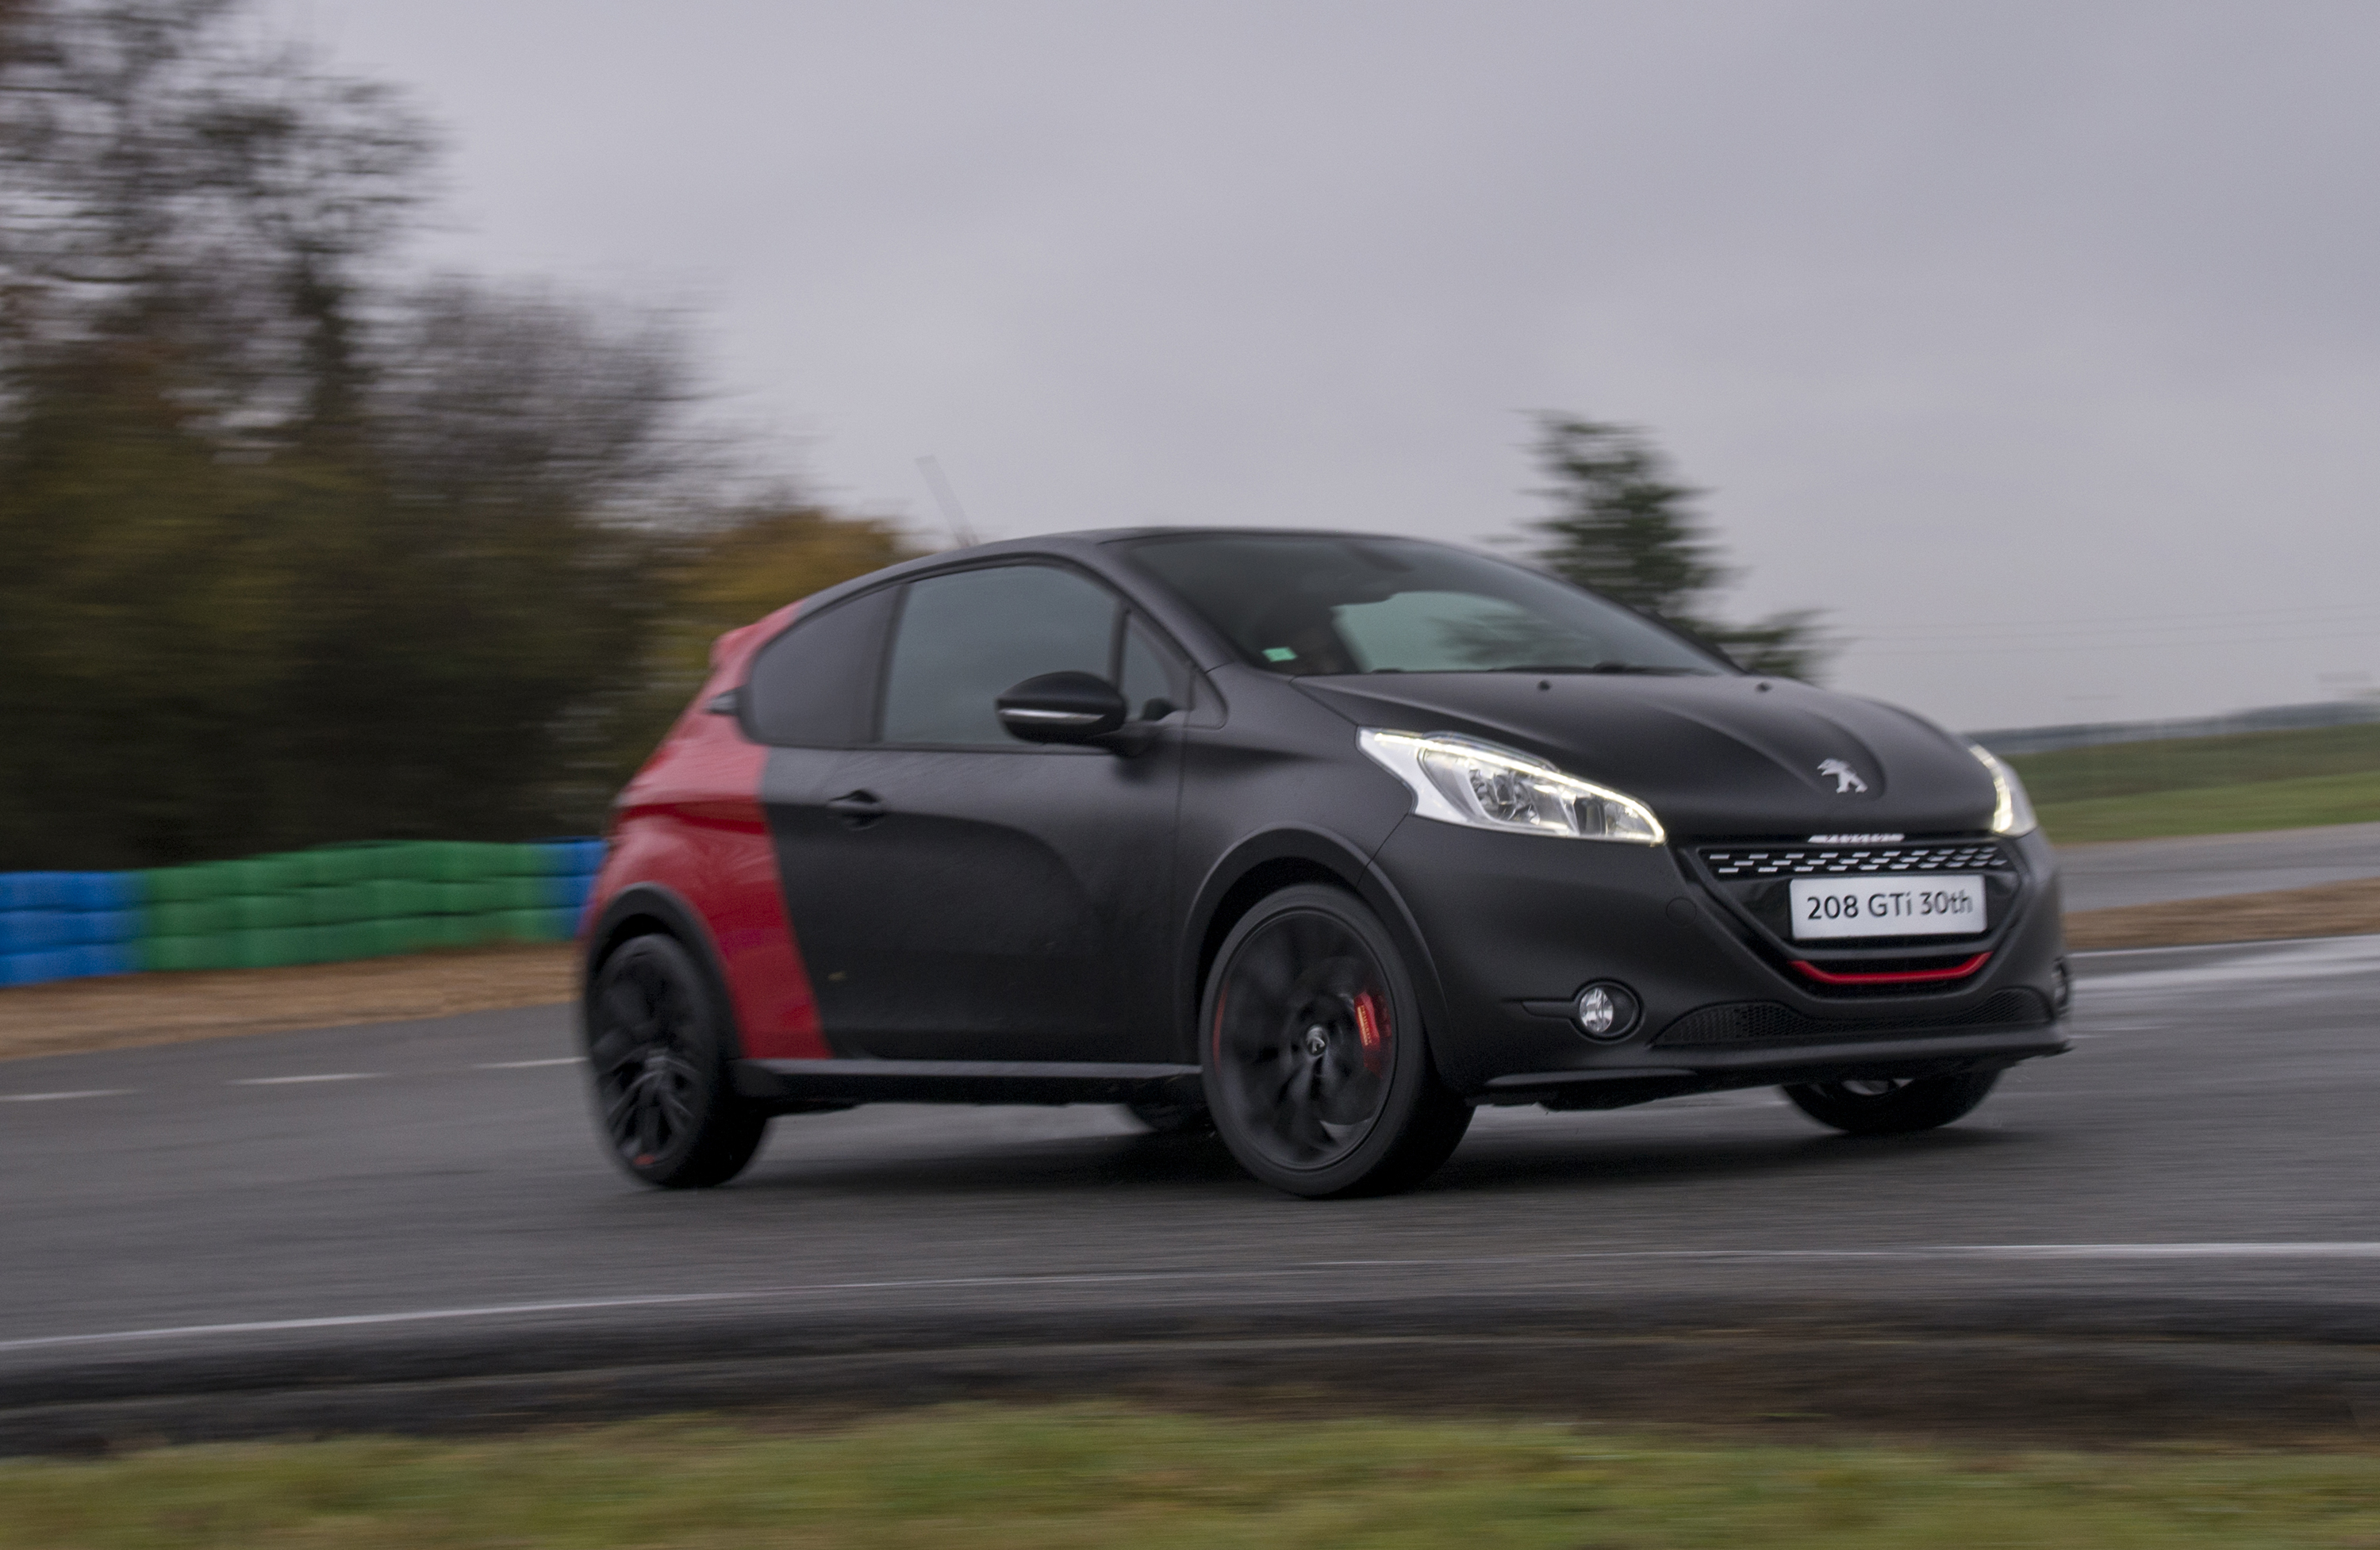 Peugeot 8 Gti And Gti By Peugeot Sport Review Prices Specs And 0 60 Time Evo